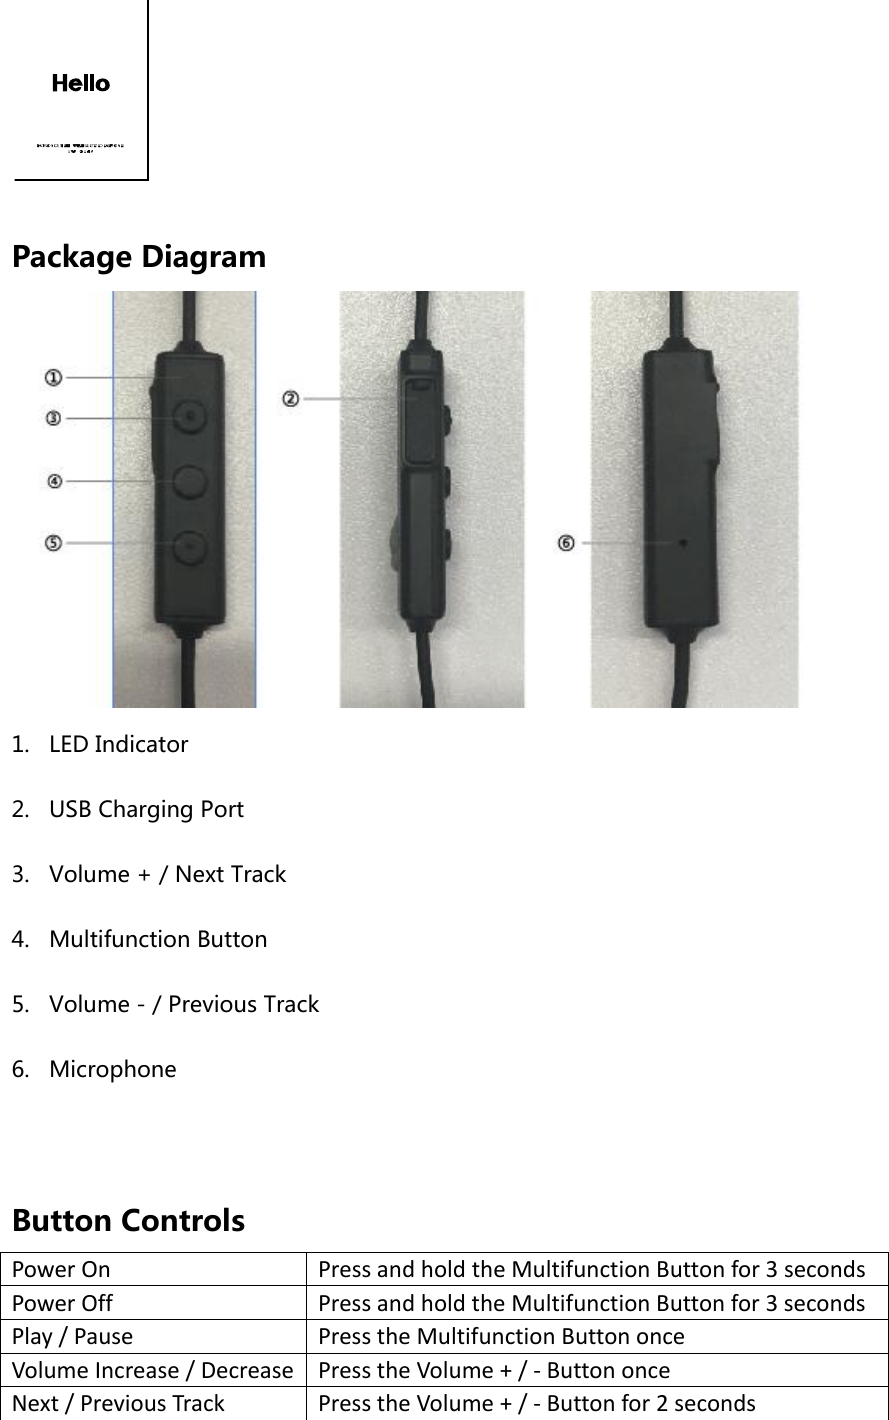   Package Diagram  1. LED Indicator 2. USB Charging Port 3. Volume + / Next Track 4. Multifunction Button 5. Volume - / Previous Track 6. Microphone   Button Controls Power On   Press and hold the Multifunction Button for 3 seconds Power Off Press and hold the Multifunction Button for 3 seconds Play / Pause   Press the Multifunction Button once Volume Increase / Decrease Press the Volume + / - Button once Next / Previous Track Press the Volume + / - Button for 2 seconds 